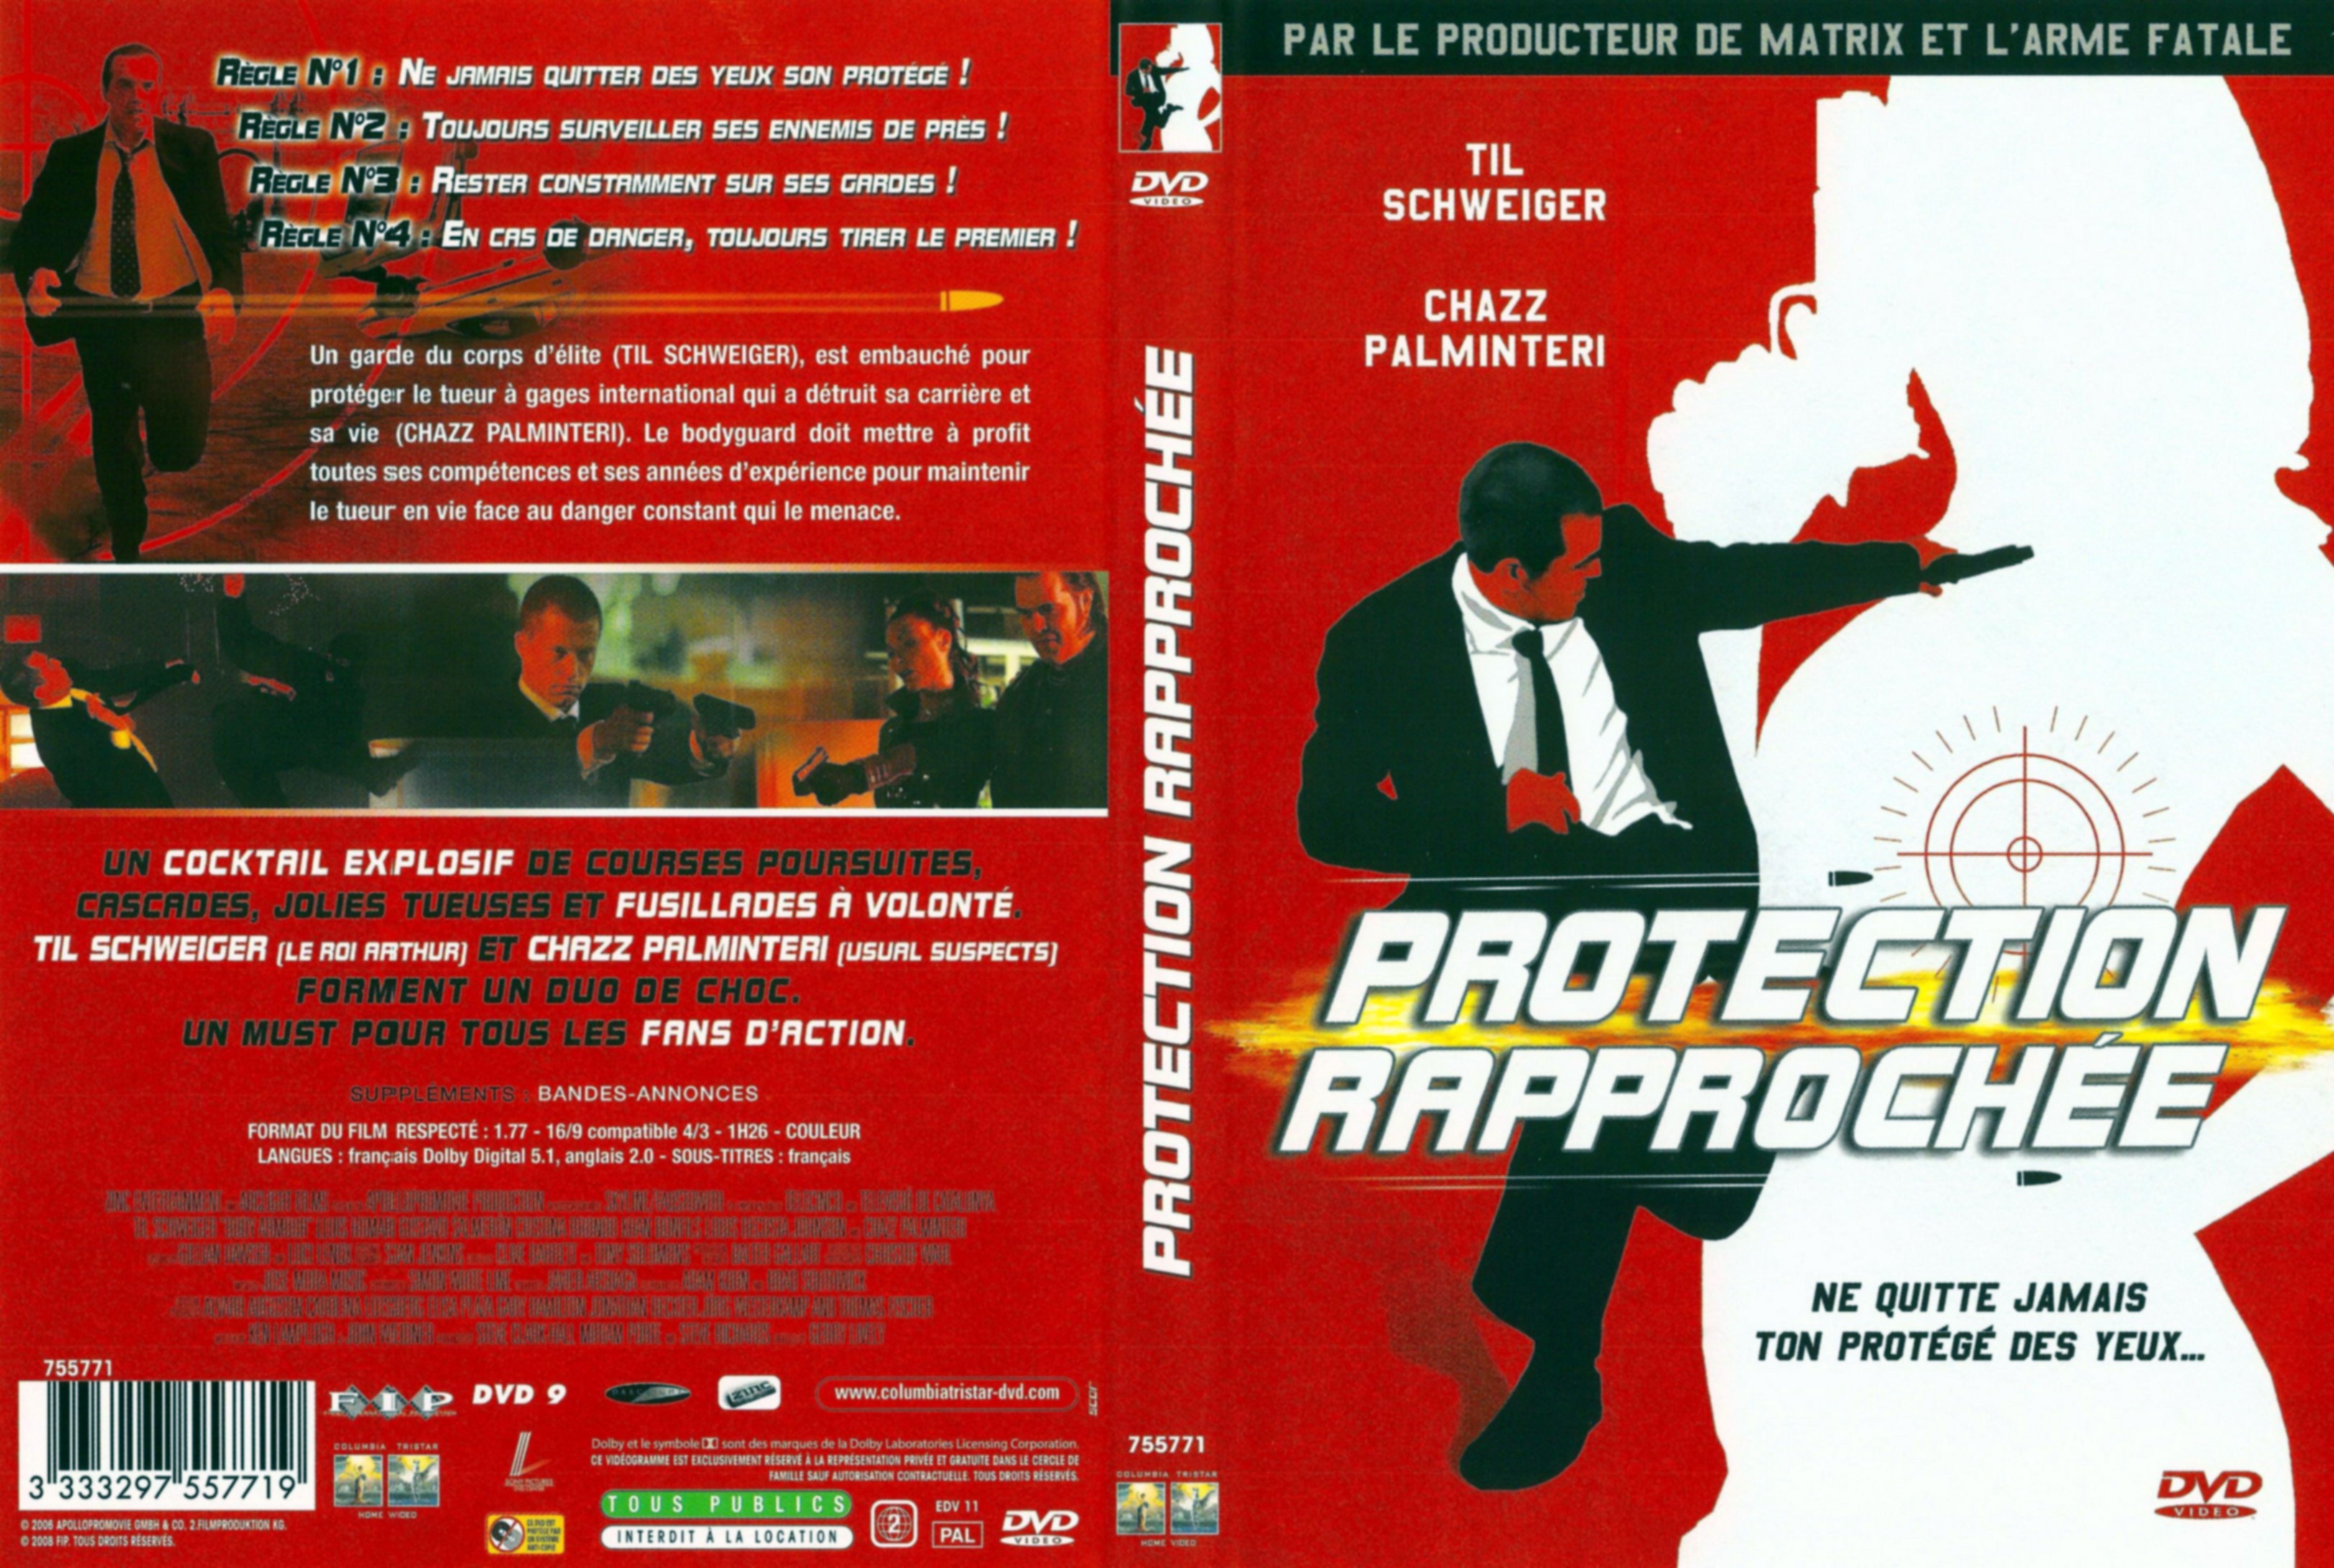 Jaquette DVD Protection rapproche (2007)